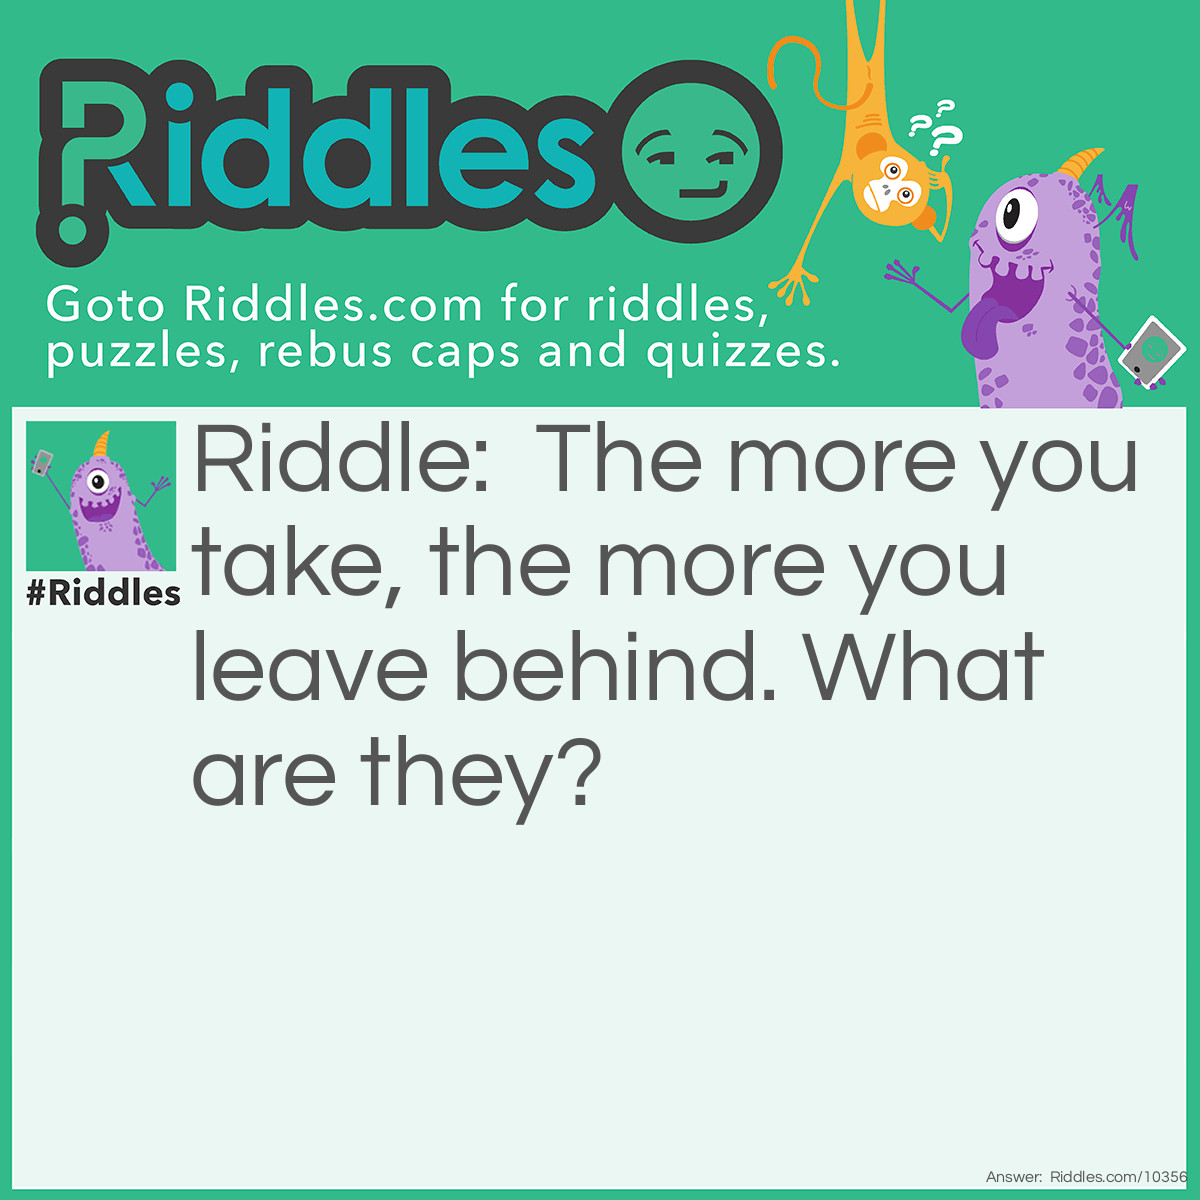 Riddle: The more you take, the more you leave behind. What are they? Answer: Footstep's.